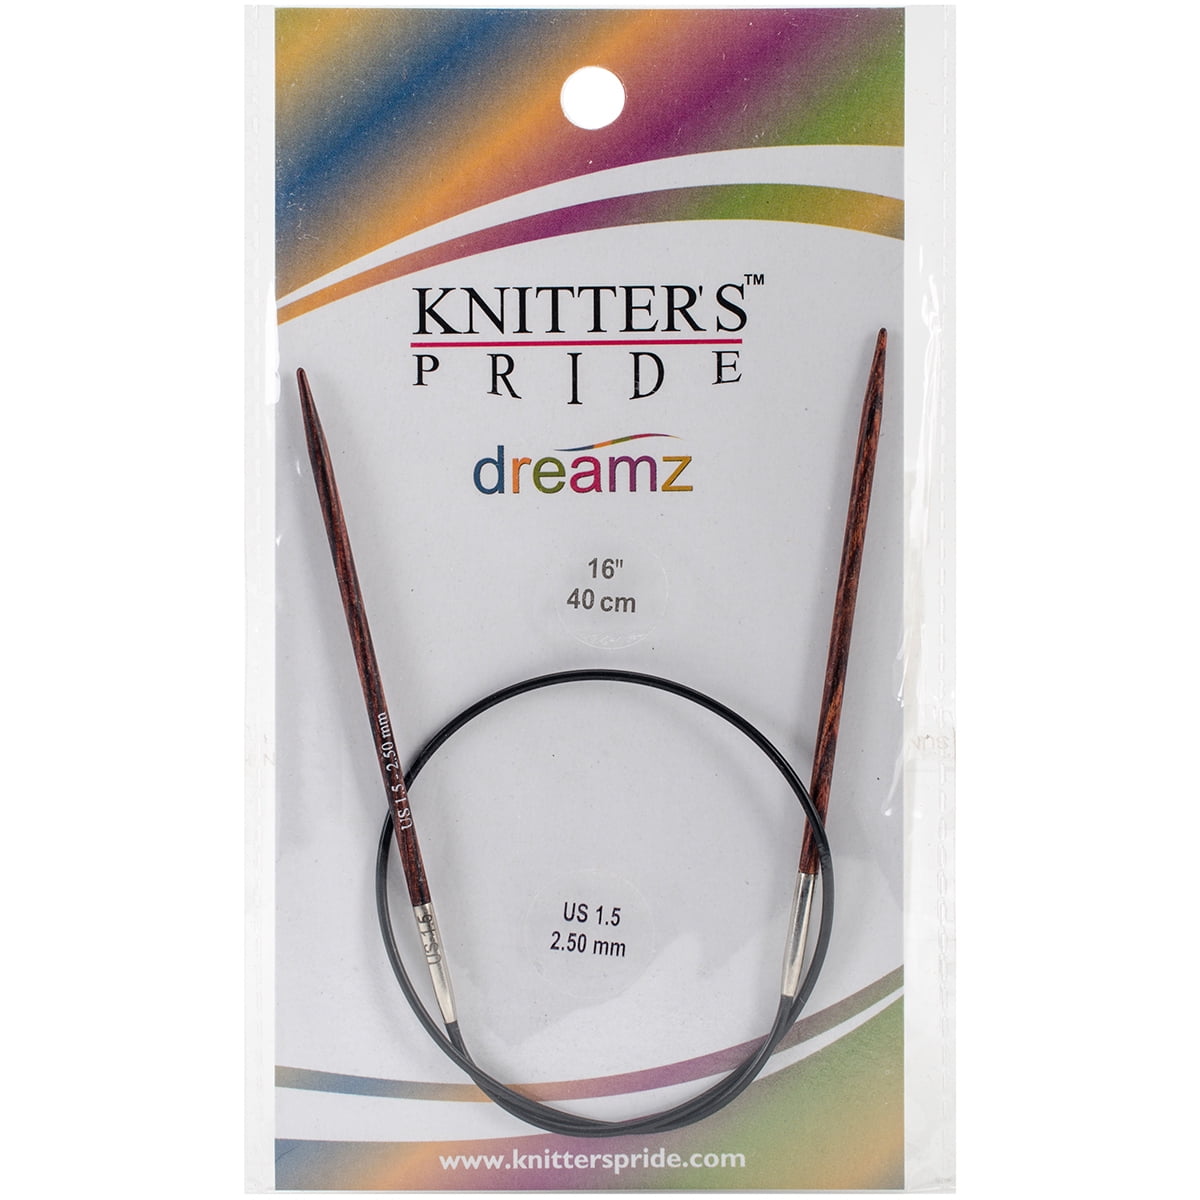  Knitter's Pride Dreamz Fixed Circular Needles 16-Size 13/9mm